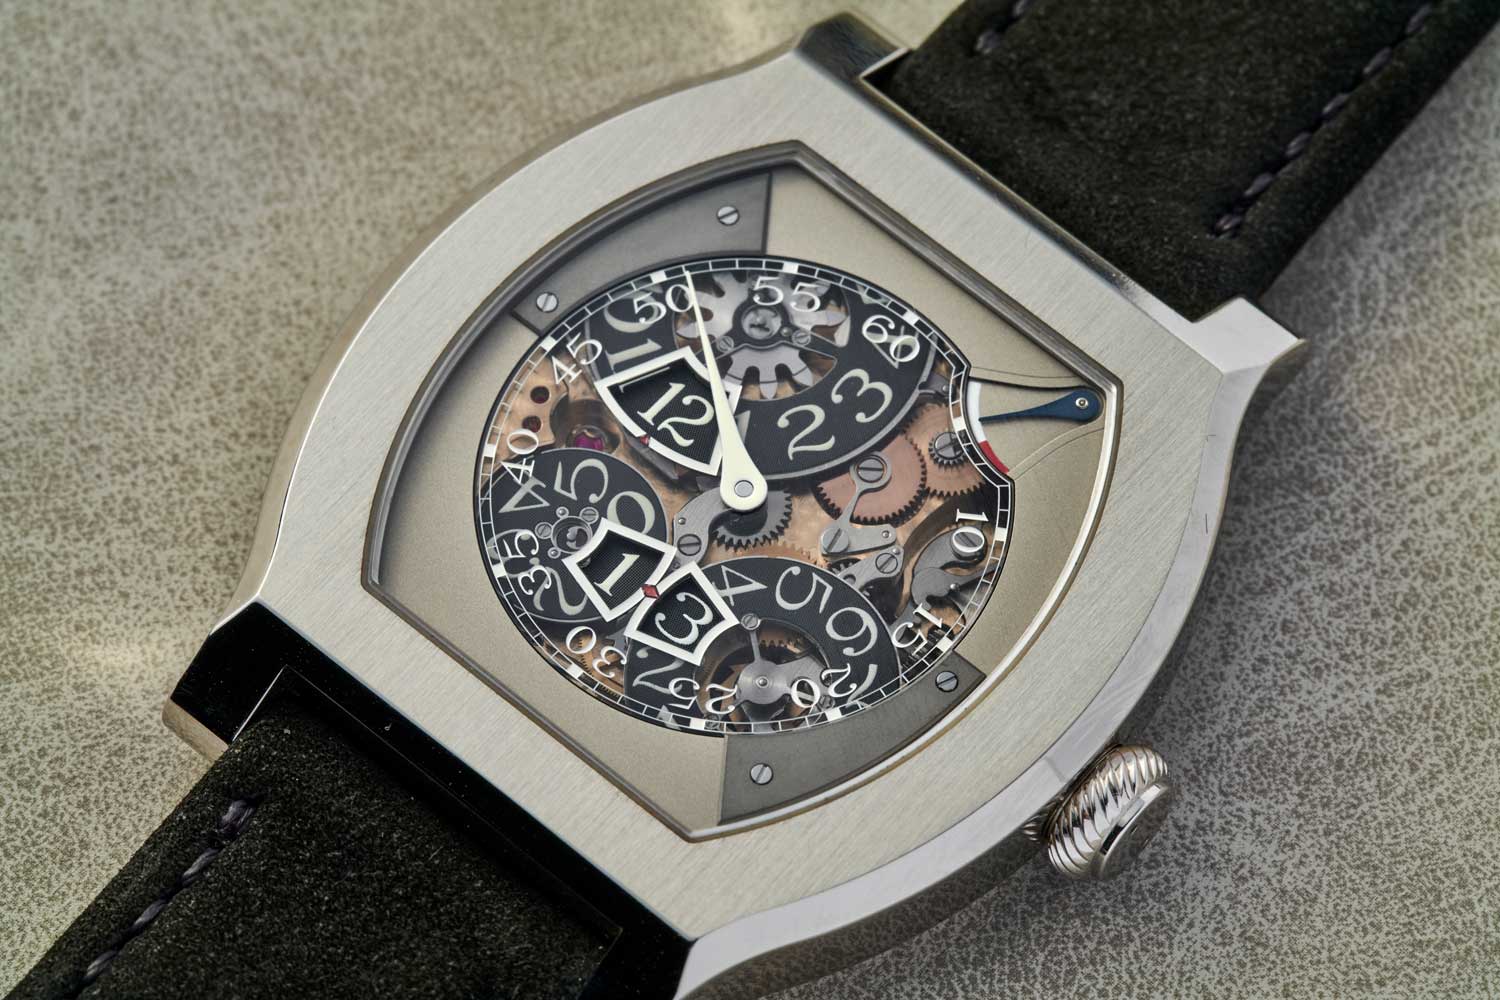 Even after six years since its introduction, the Vagabondage III remains the only watch on the market with a digital jumping seconds. The jumping seconds is driven by a gear train separate from the jumping hours and sweeping minutes. Along this gear train is a one-second remontoir that stores and releases a consistent amount of energy every second to power the jump.